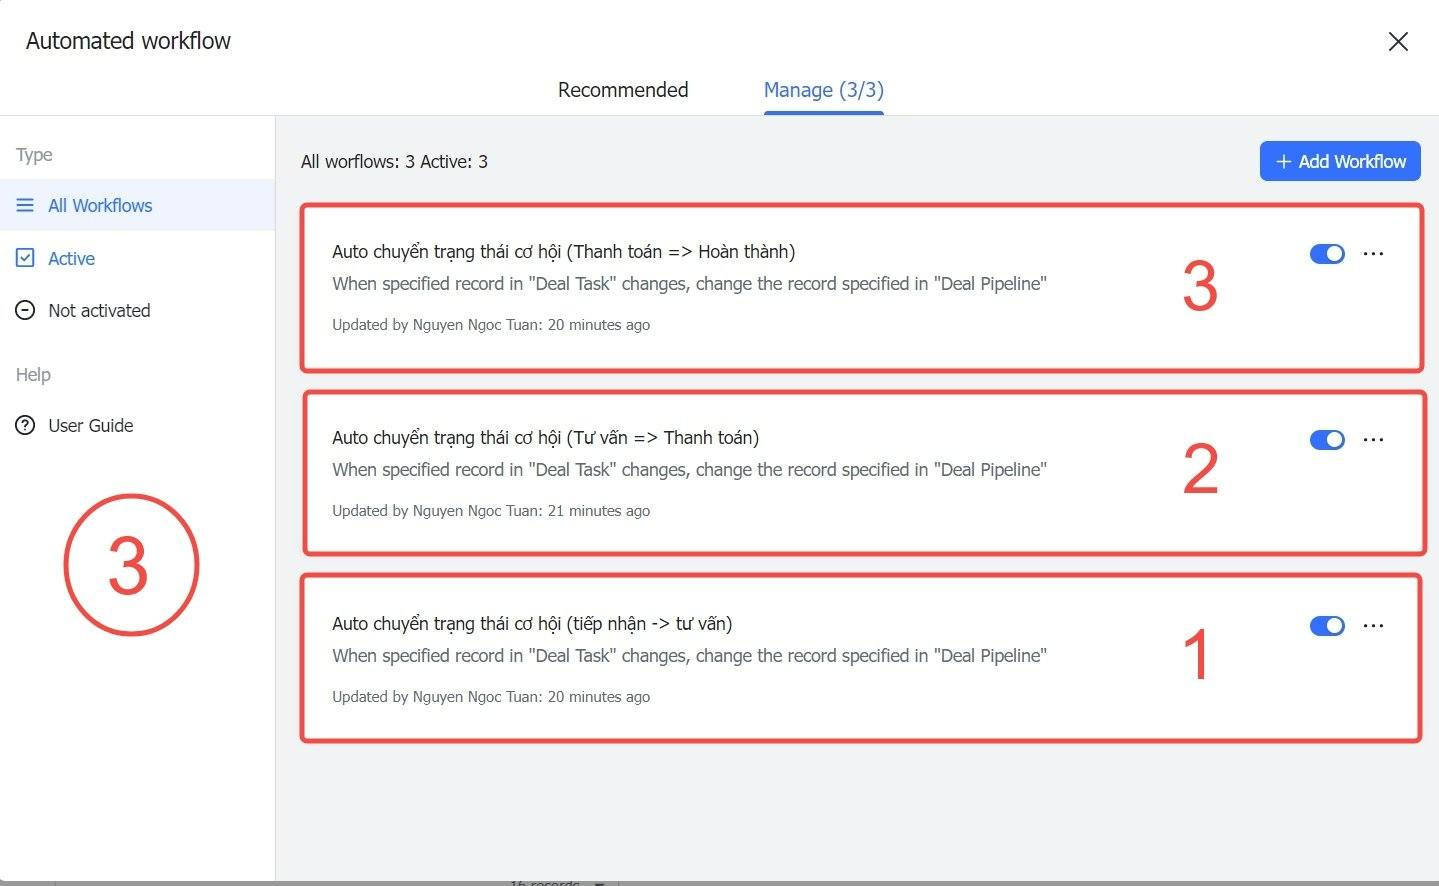 May be an image of text that says 'Automated workflow Type All Workflows Recommended worflows: Active: Manage (3/3) Active Θ Not activated Auto chuyển trạng thái When specified record c Updated by Nguyen Ngoc Tuan: Help hội (Thanh Hoàn thành) Deal changes, change the ecord specified Workflow User Guide minutes ago "Deal Pipeline" Auto chuyển trạng thái When specified record 3 Updated by Nguyen Ngoc Tuan: Thanh toán) "Deal Task" changes, change the record specified minutes ago 3 'Deal Pipeline" chuyển trạng When specified record 2 Deal Updated by Nguyen Ngoc (tiếp nhận vẩn) changes, change the record specified minutes ago 'Deal Pipeline" 1'